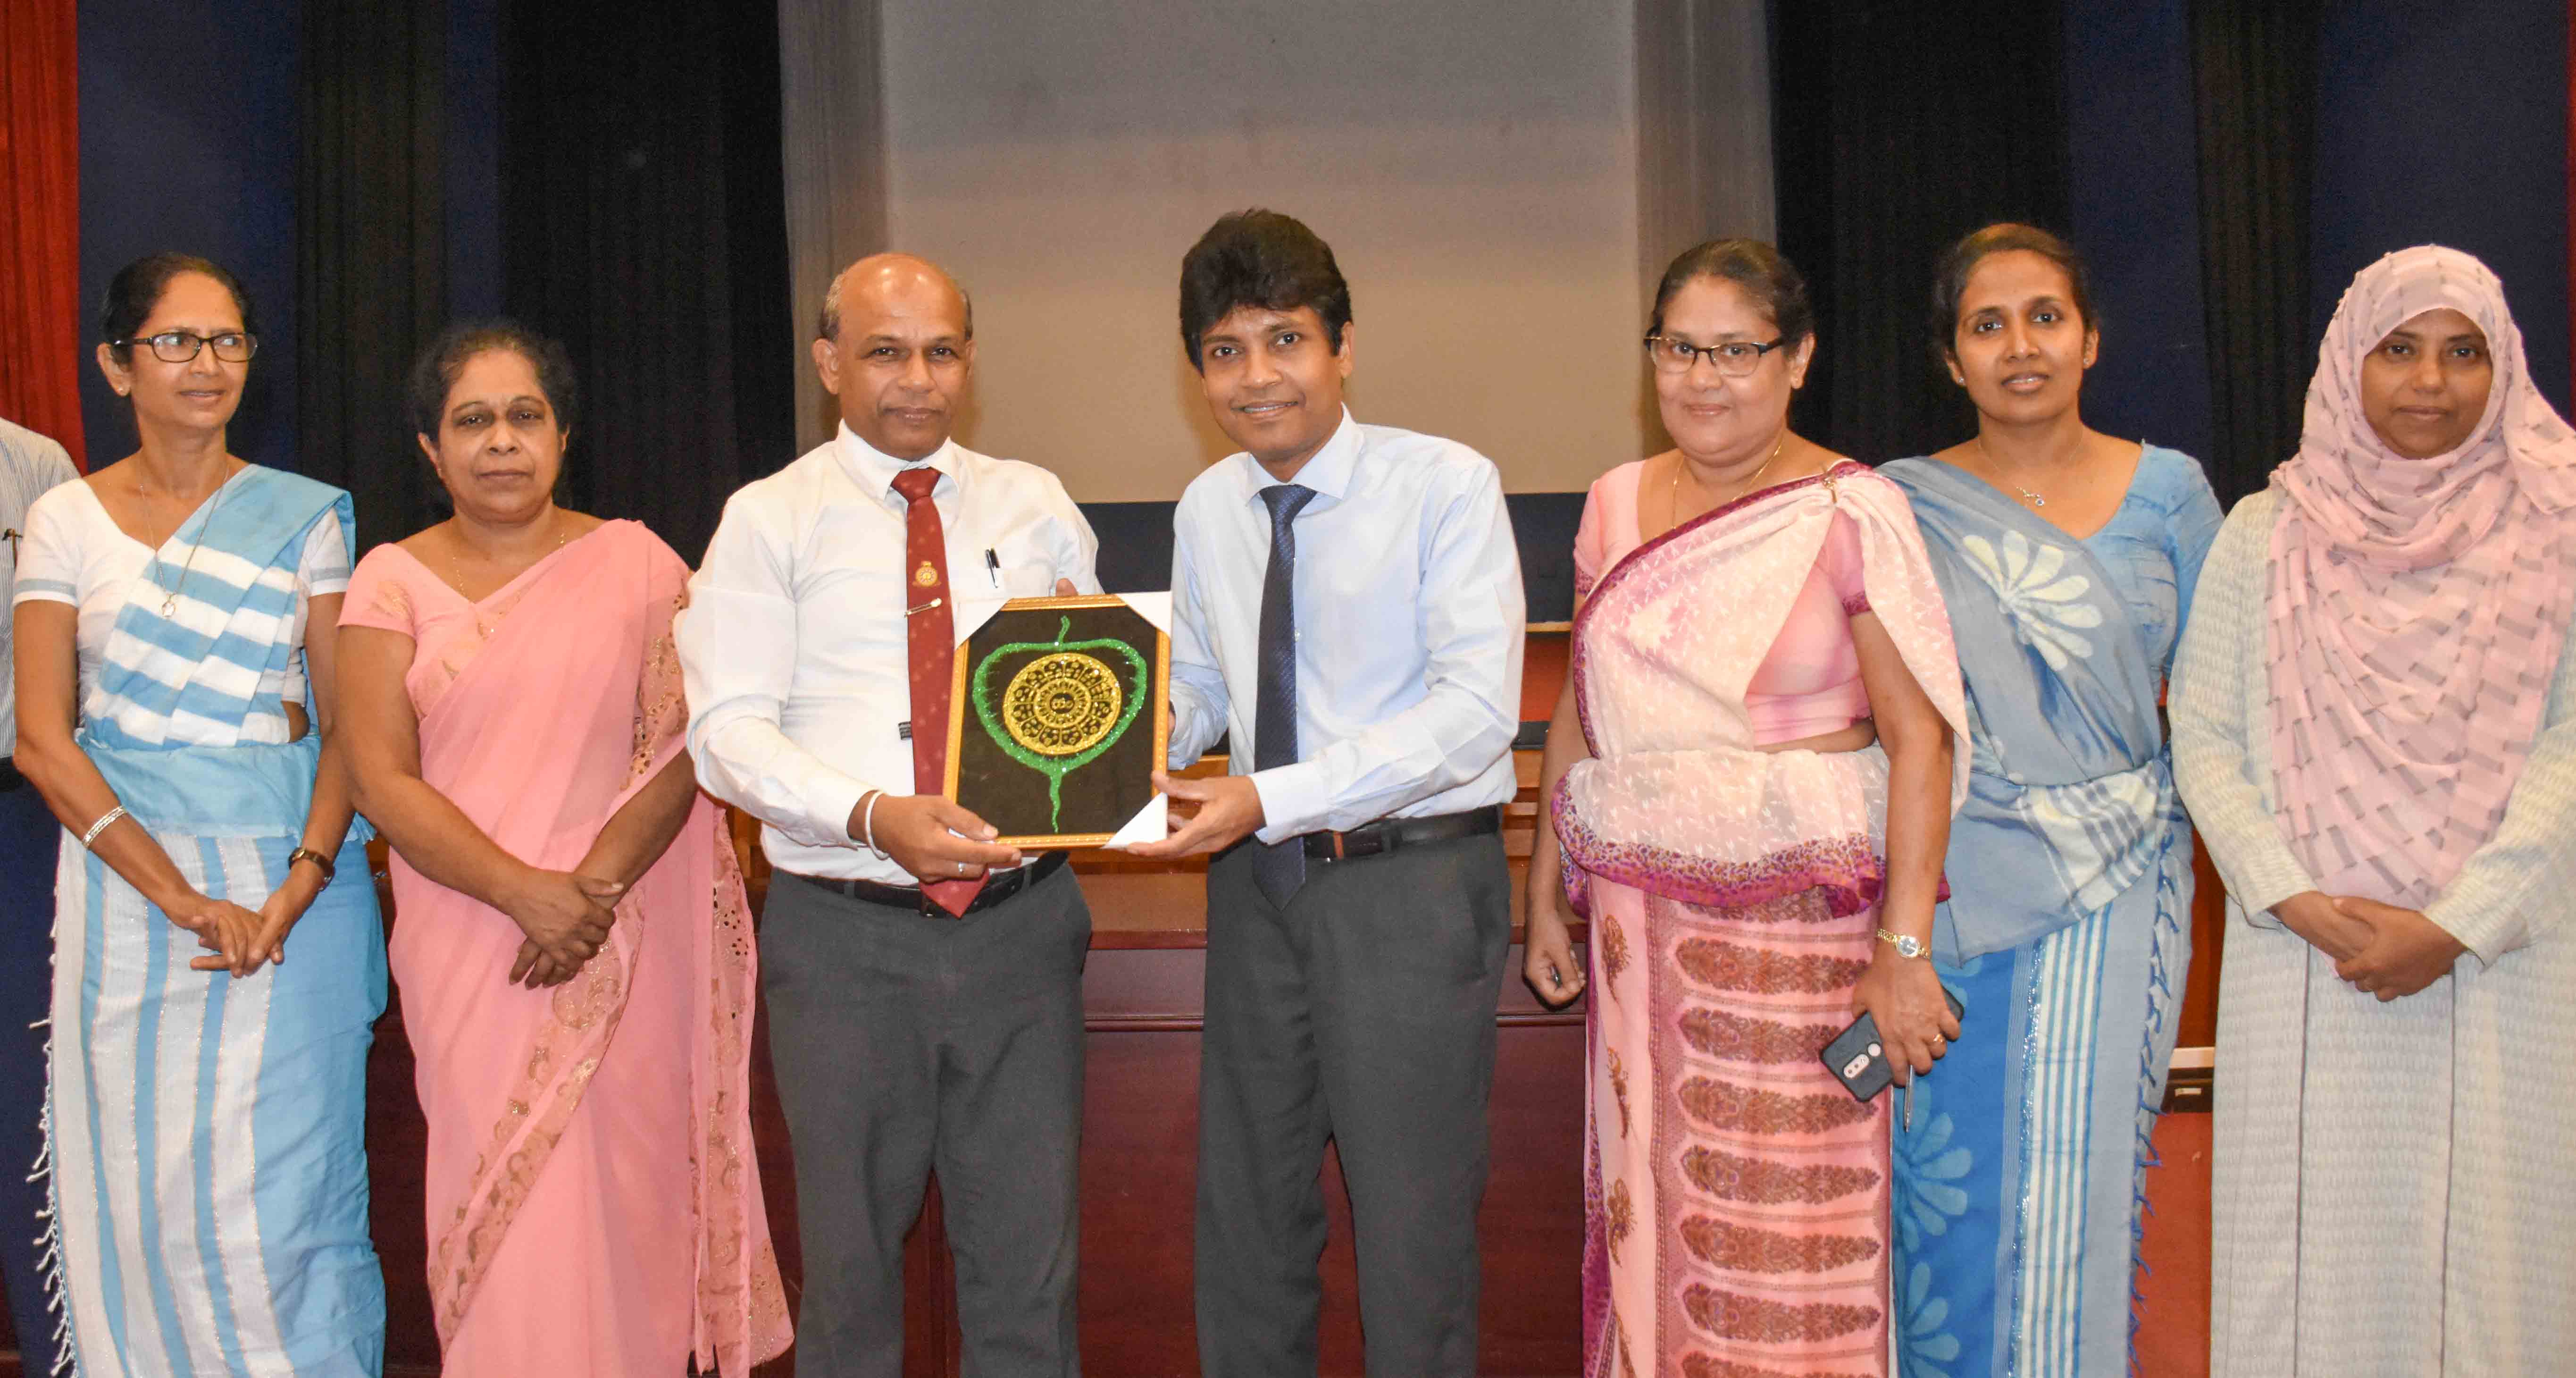 Awareness programme on “Managerial Operations in the University”